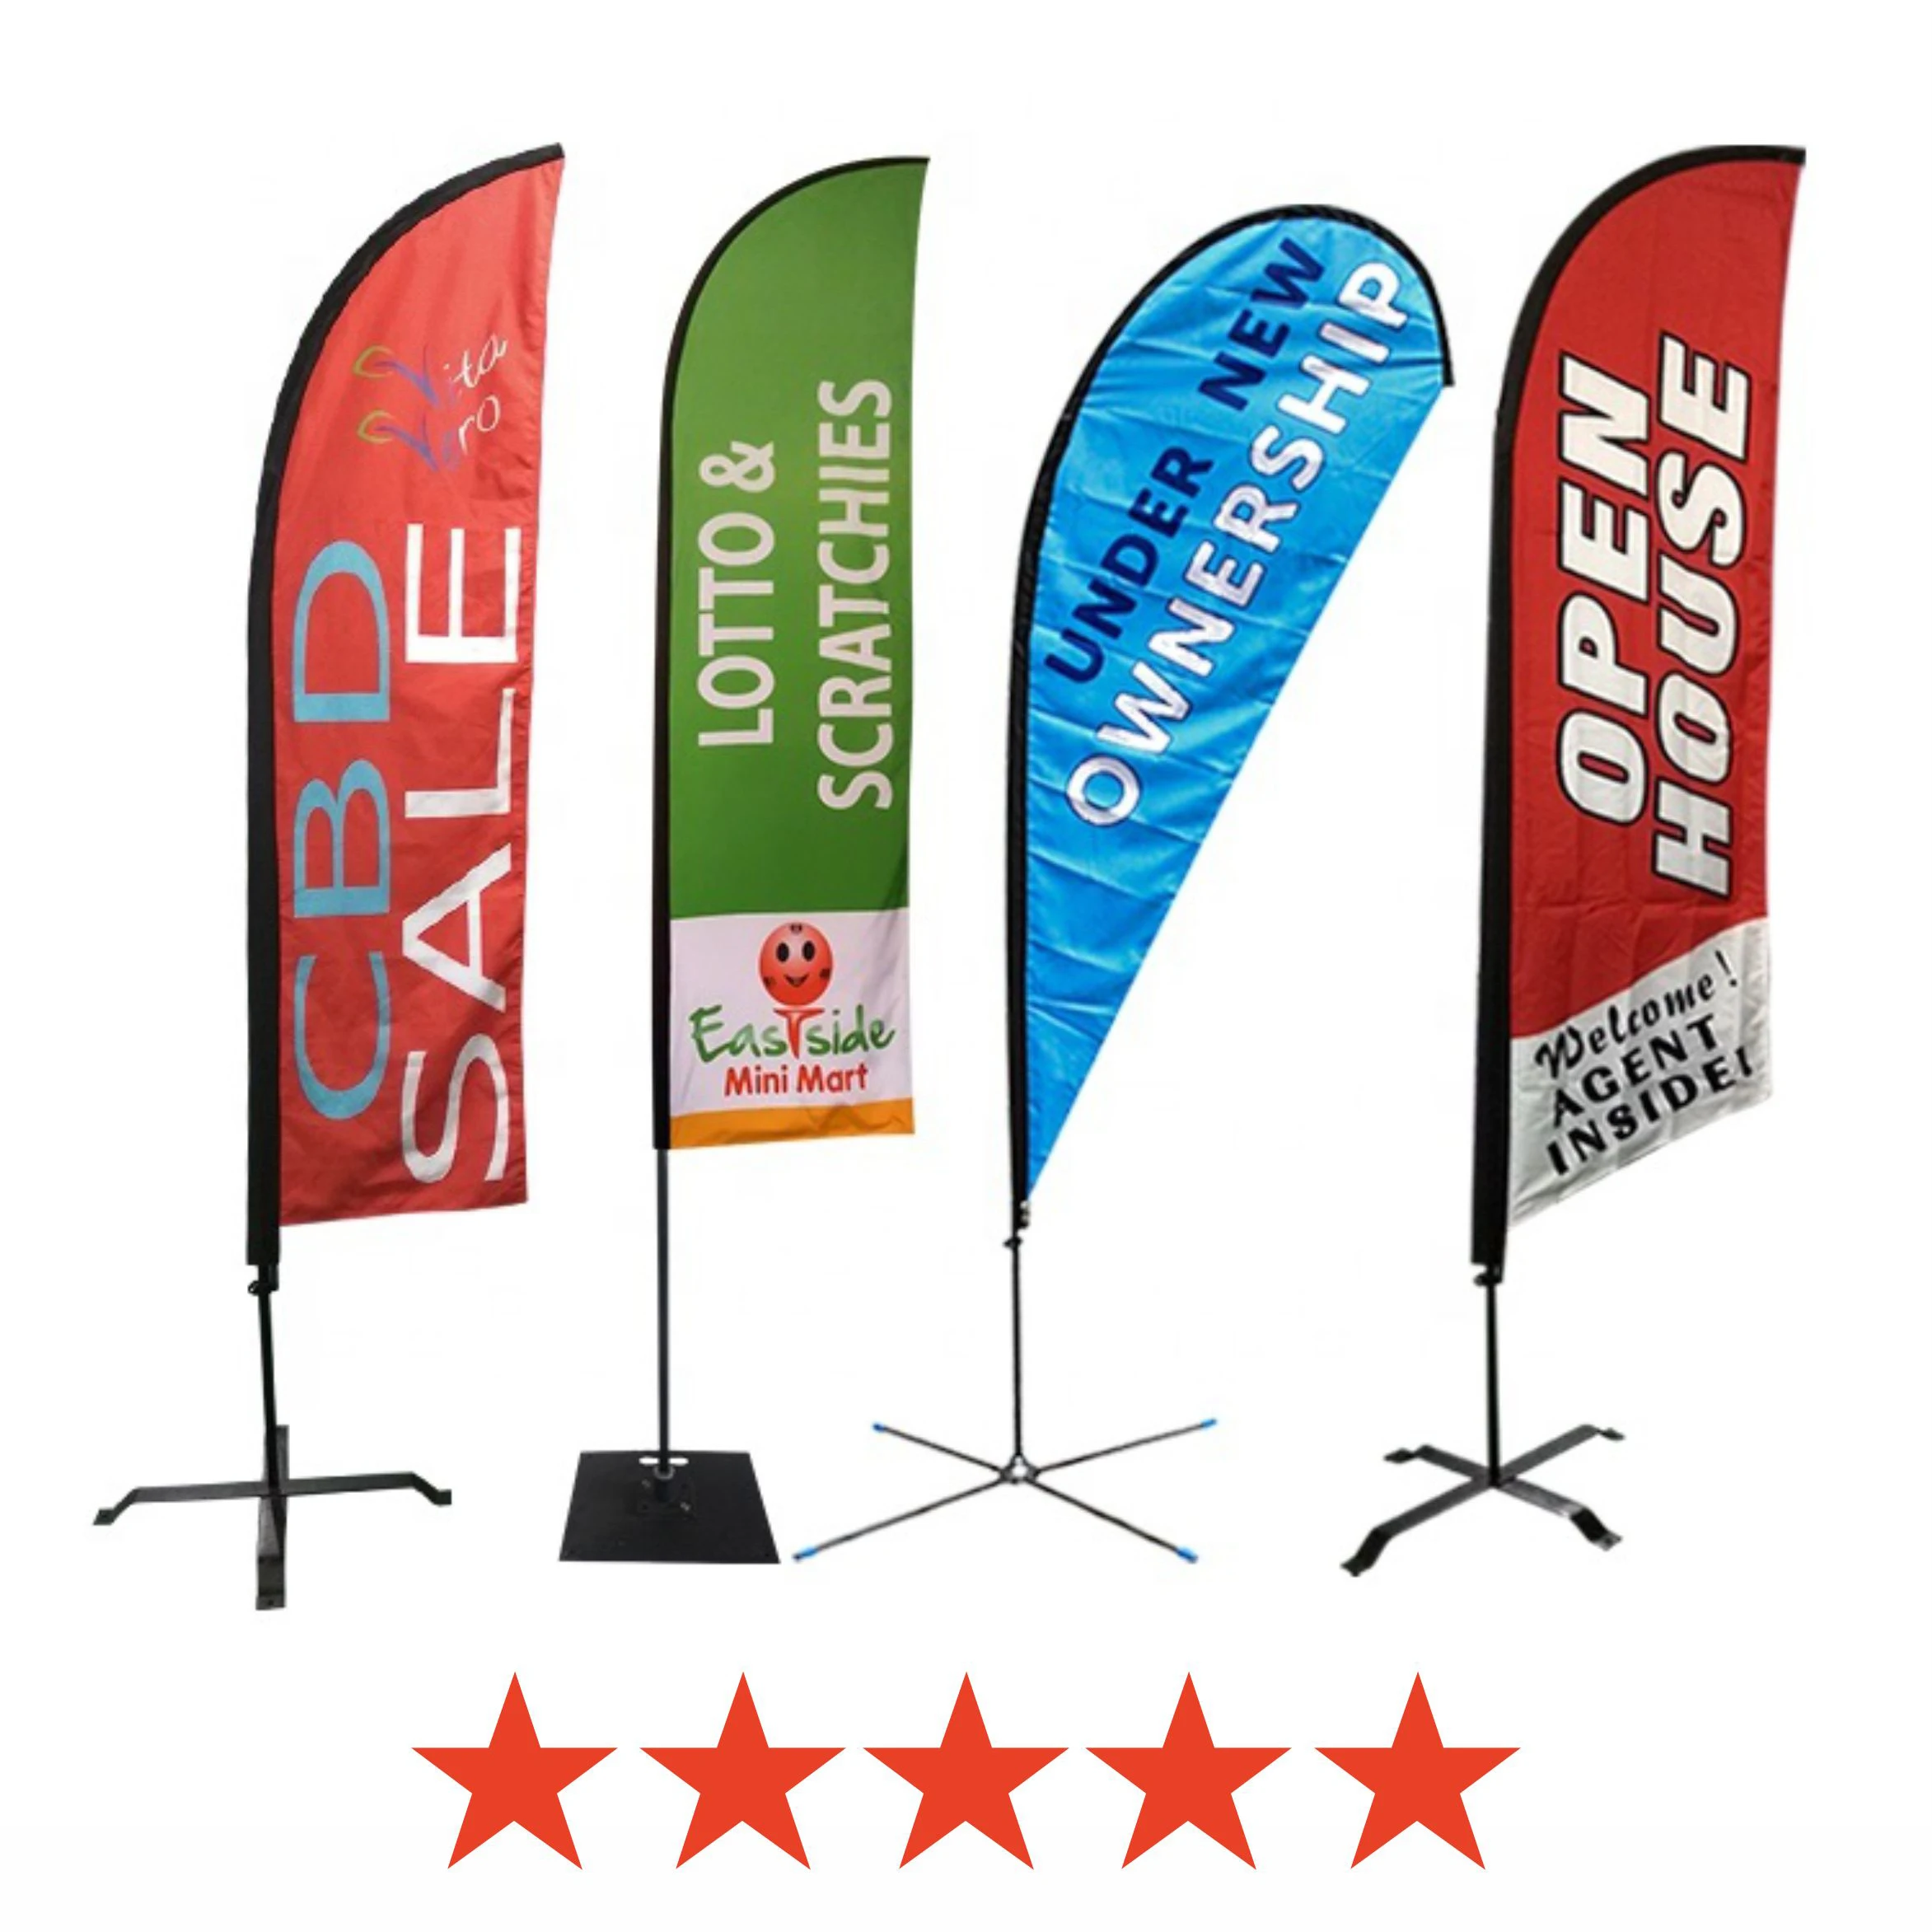 3X5 Sale Marketing Advertising Flag 2 Sided Double Sided Banner USA SELLER 